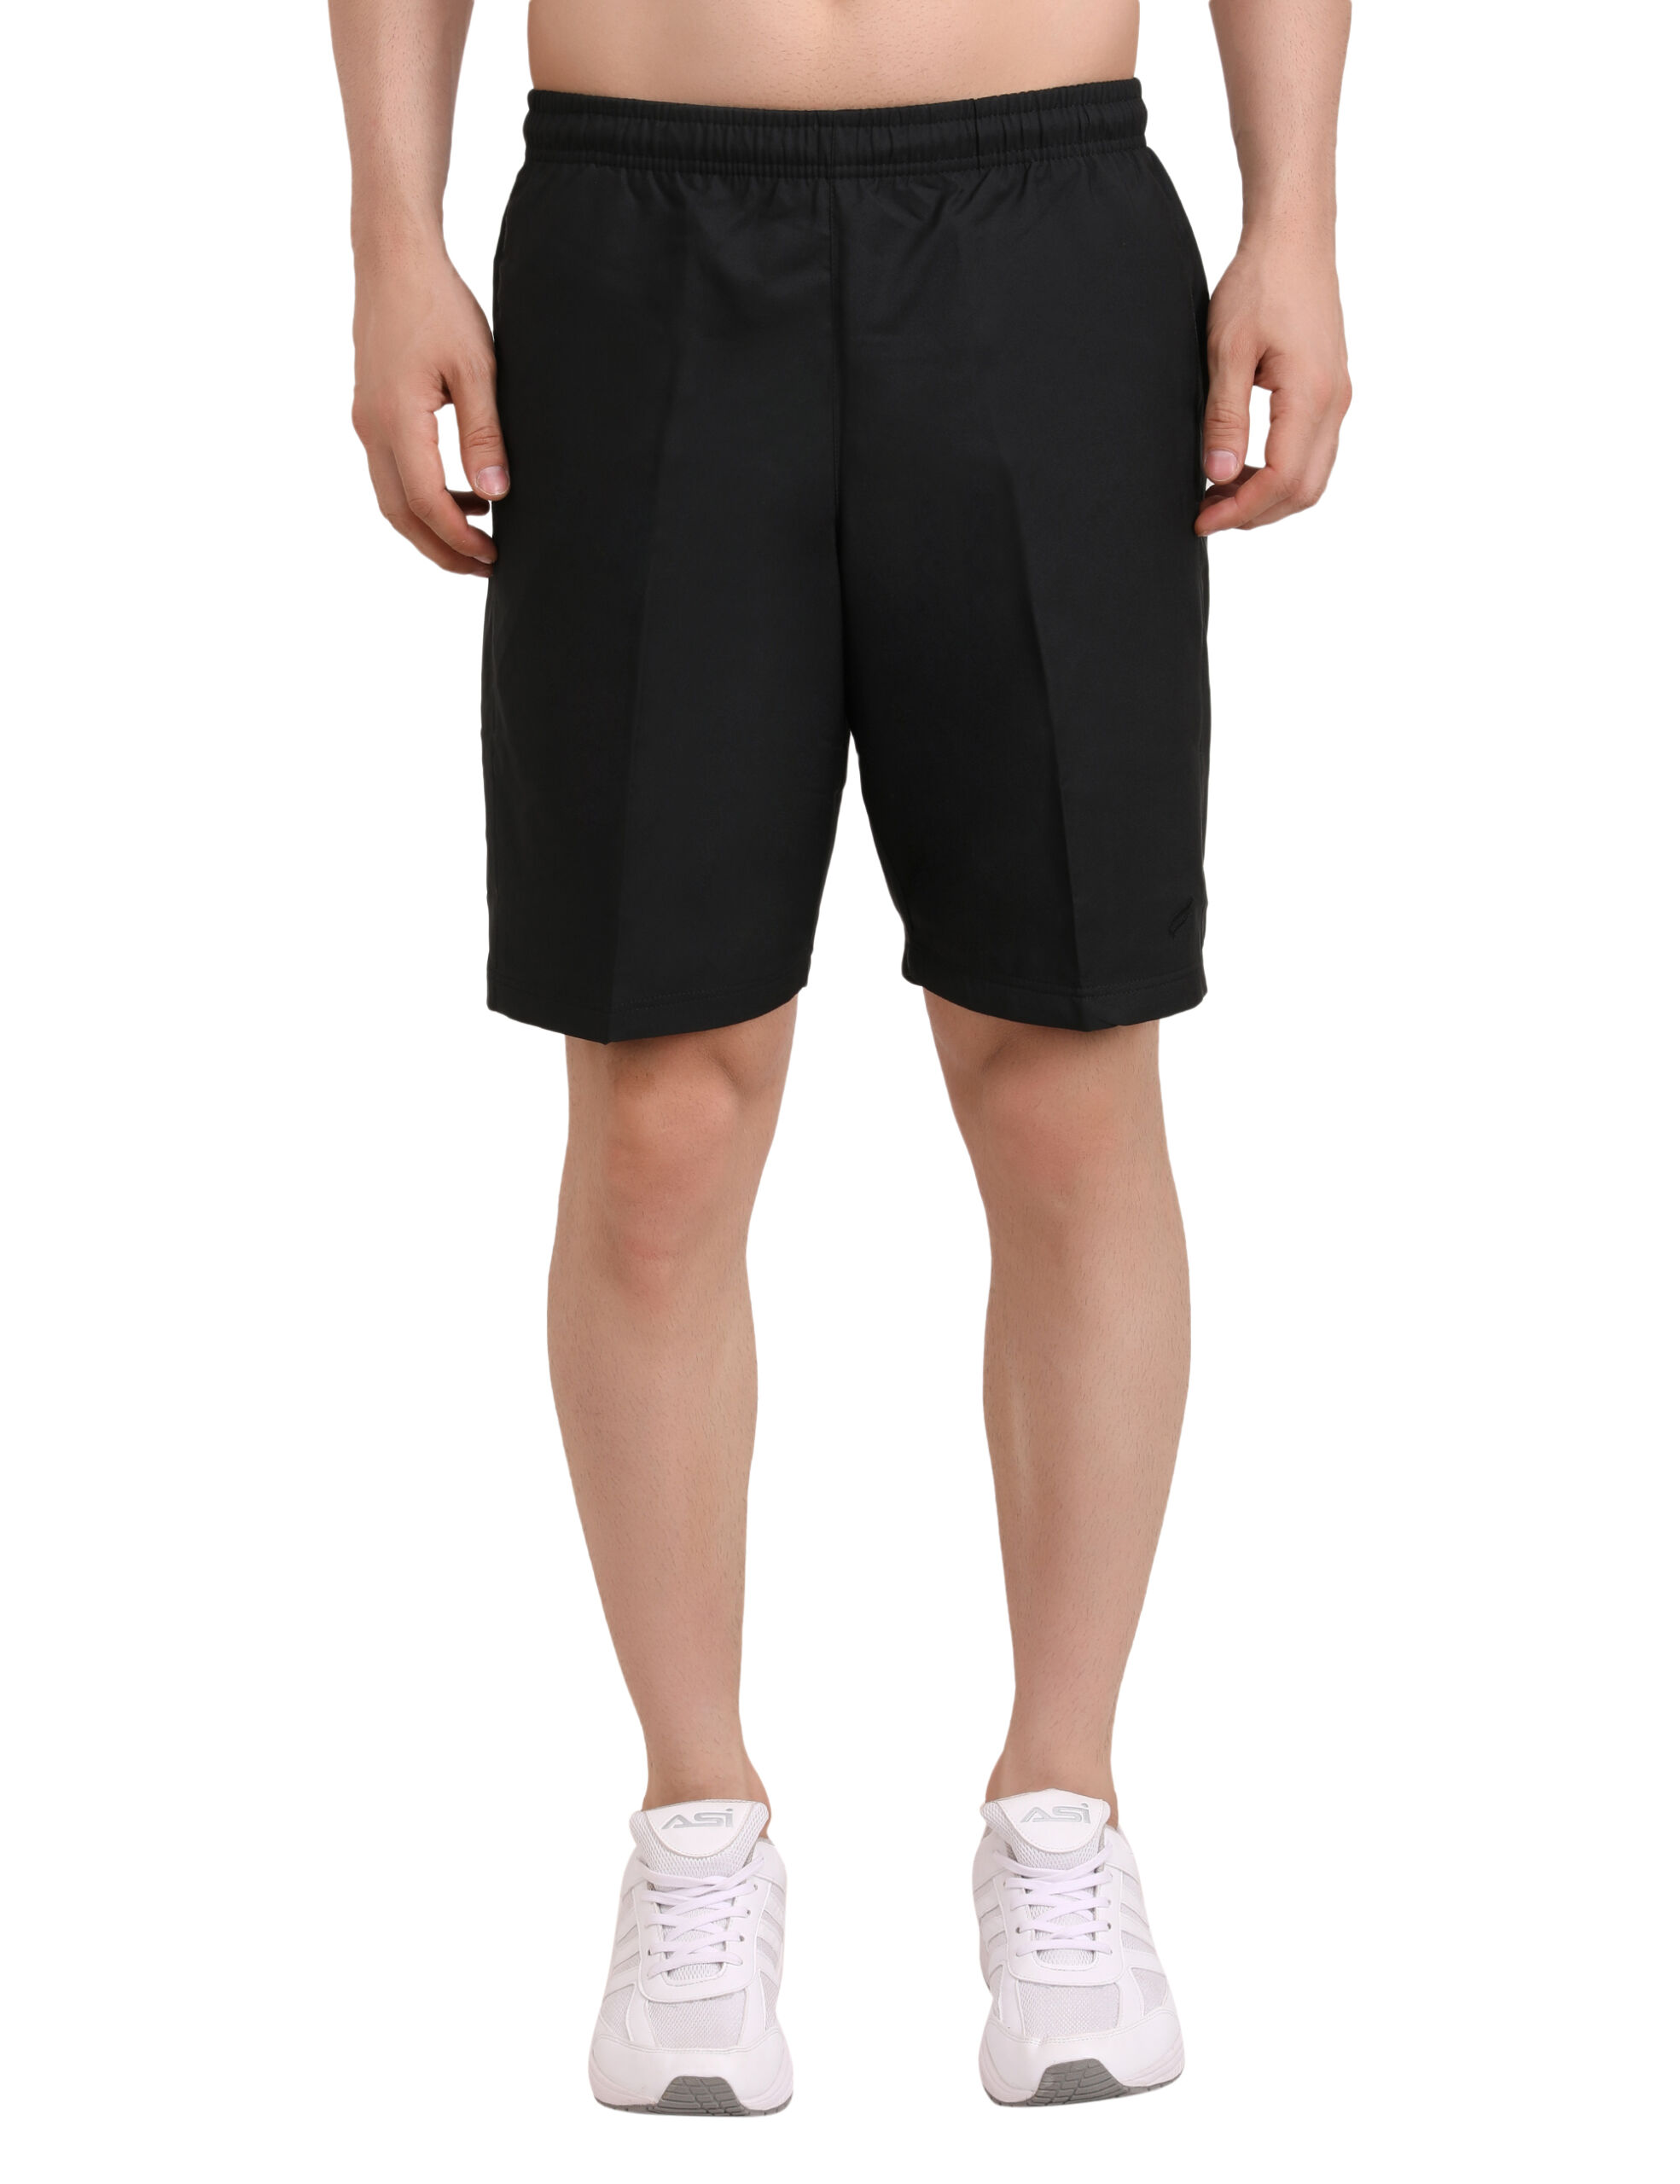 ASI Comfeel Shorts Black Color - Anand Sports Industries